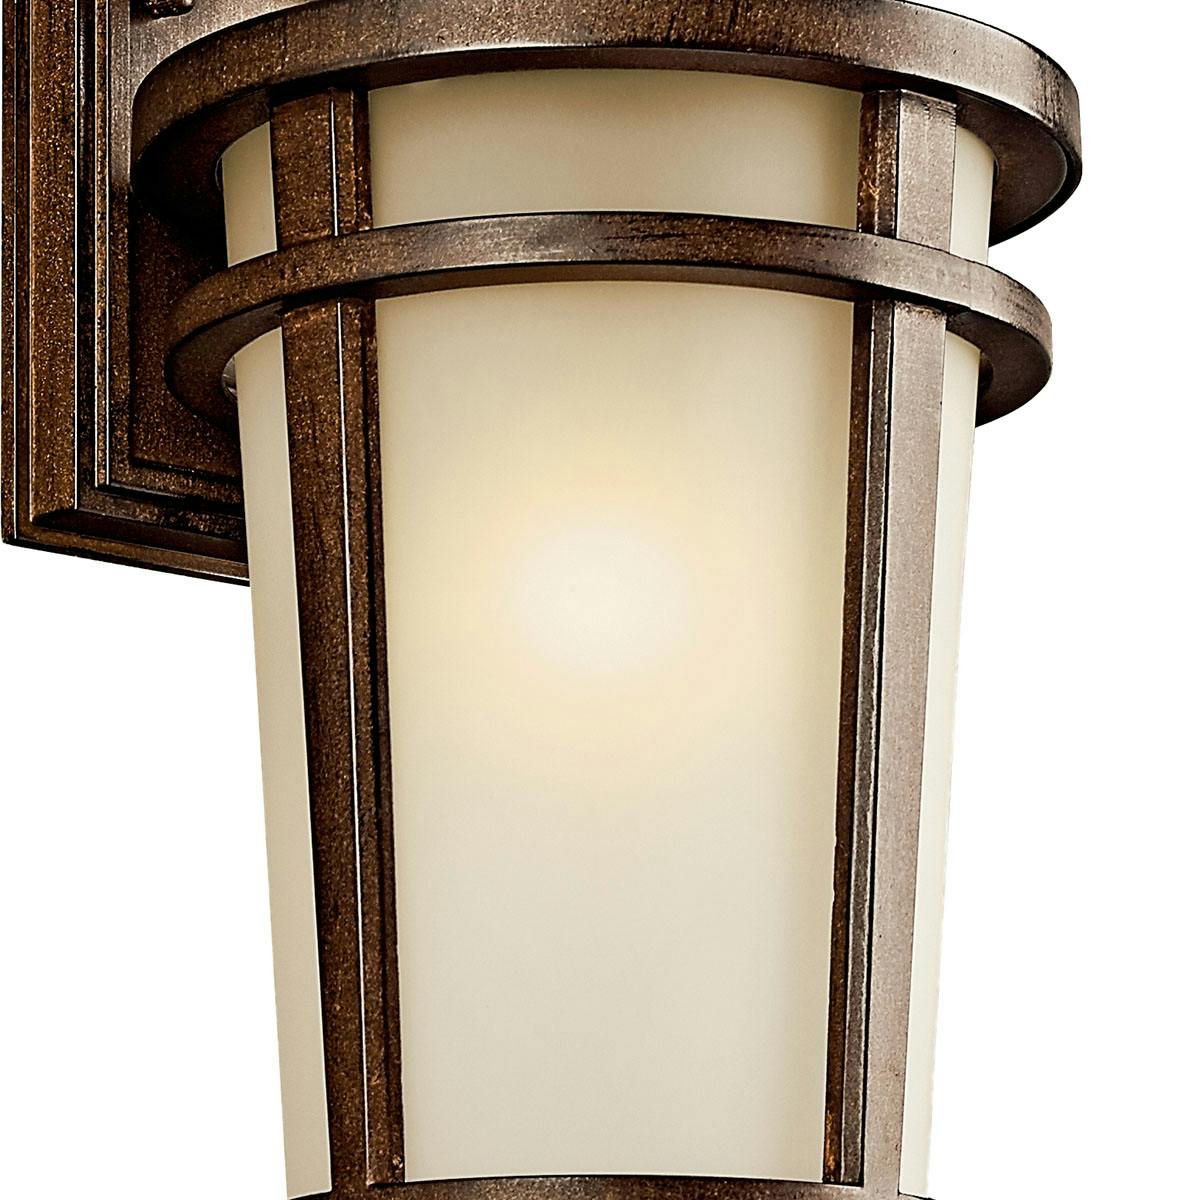 Close up view of the The Atwood 14.25" Wall Light Brown Stone on a white background